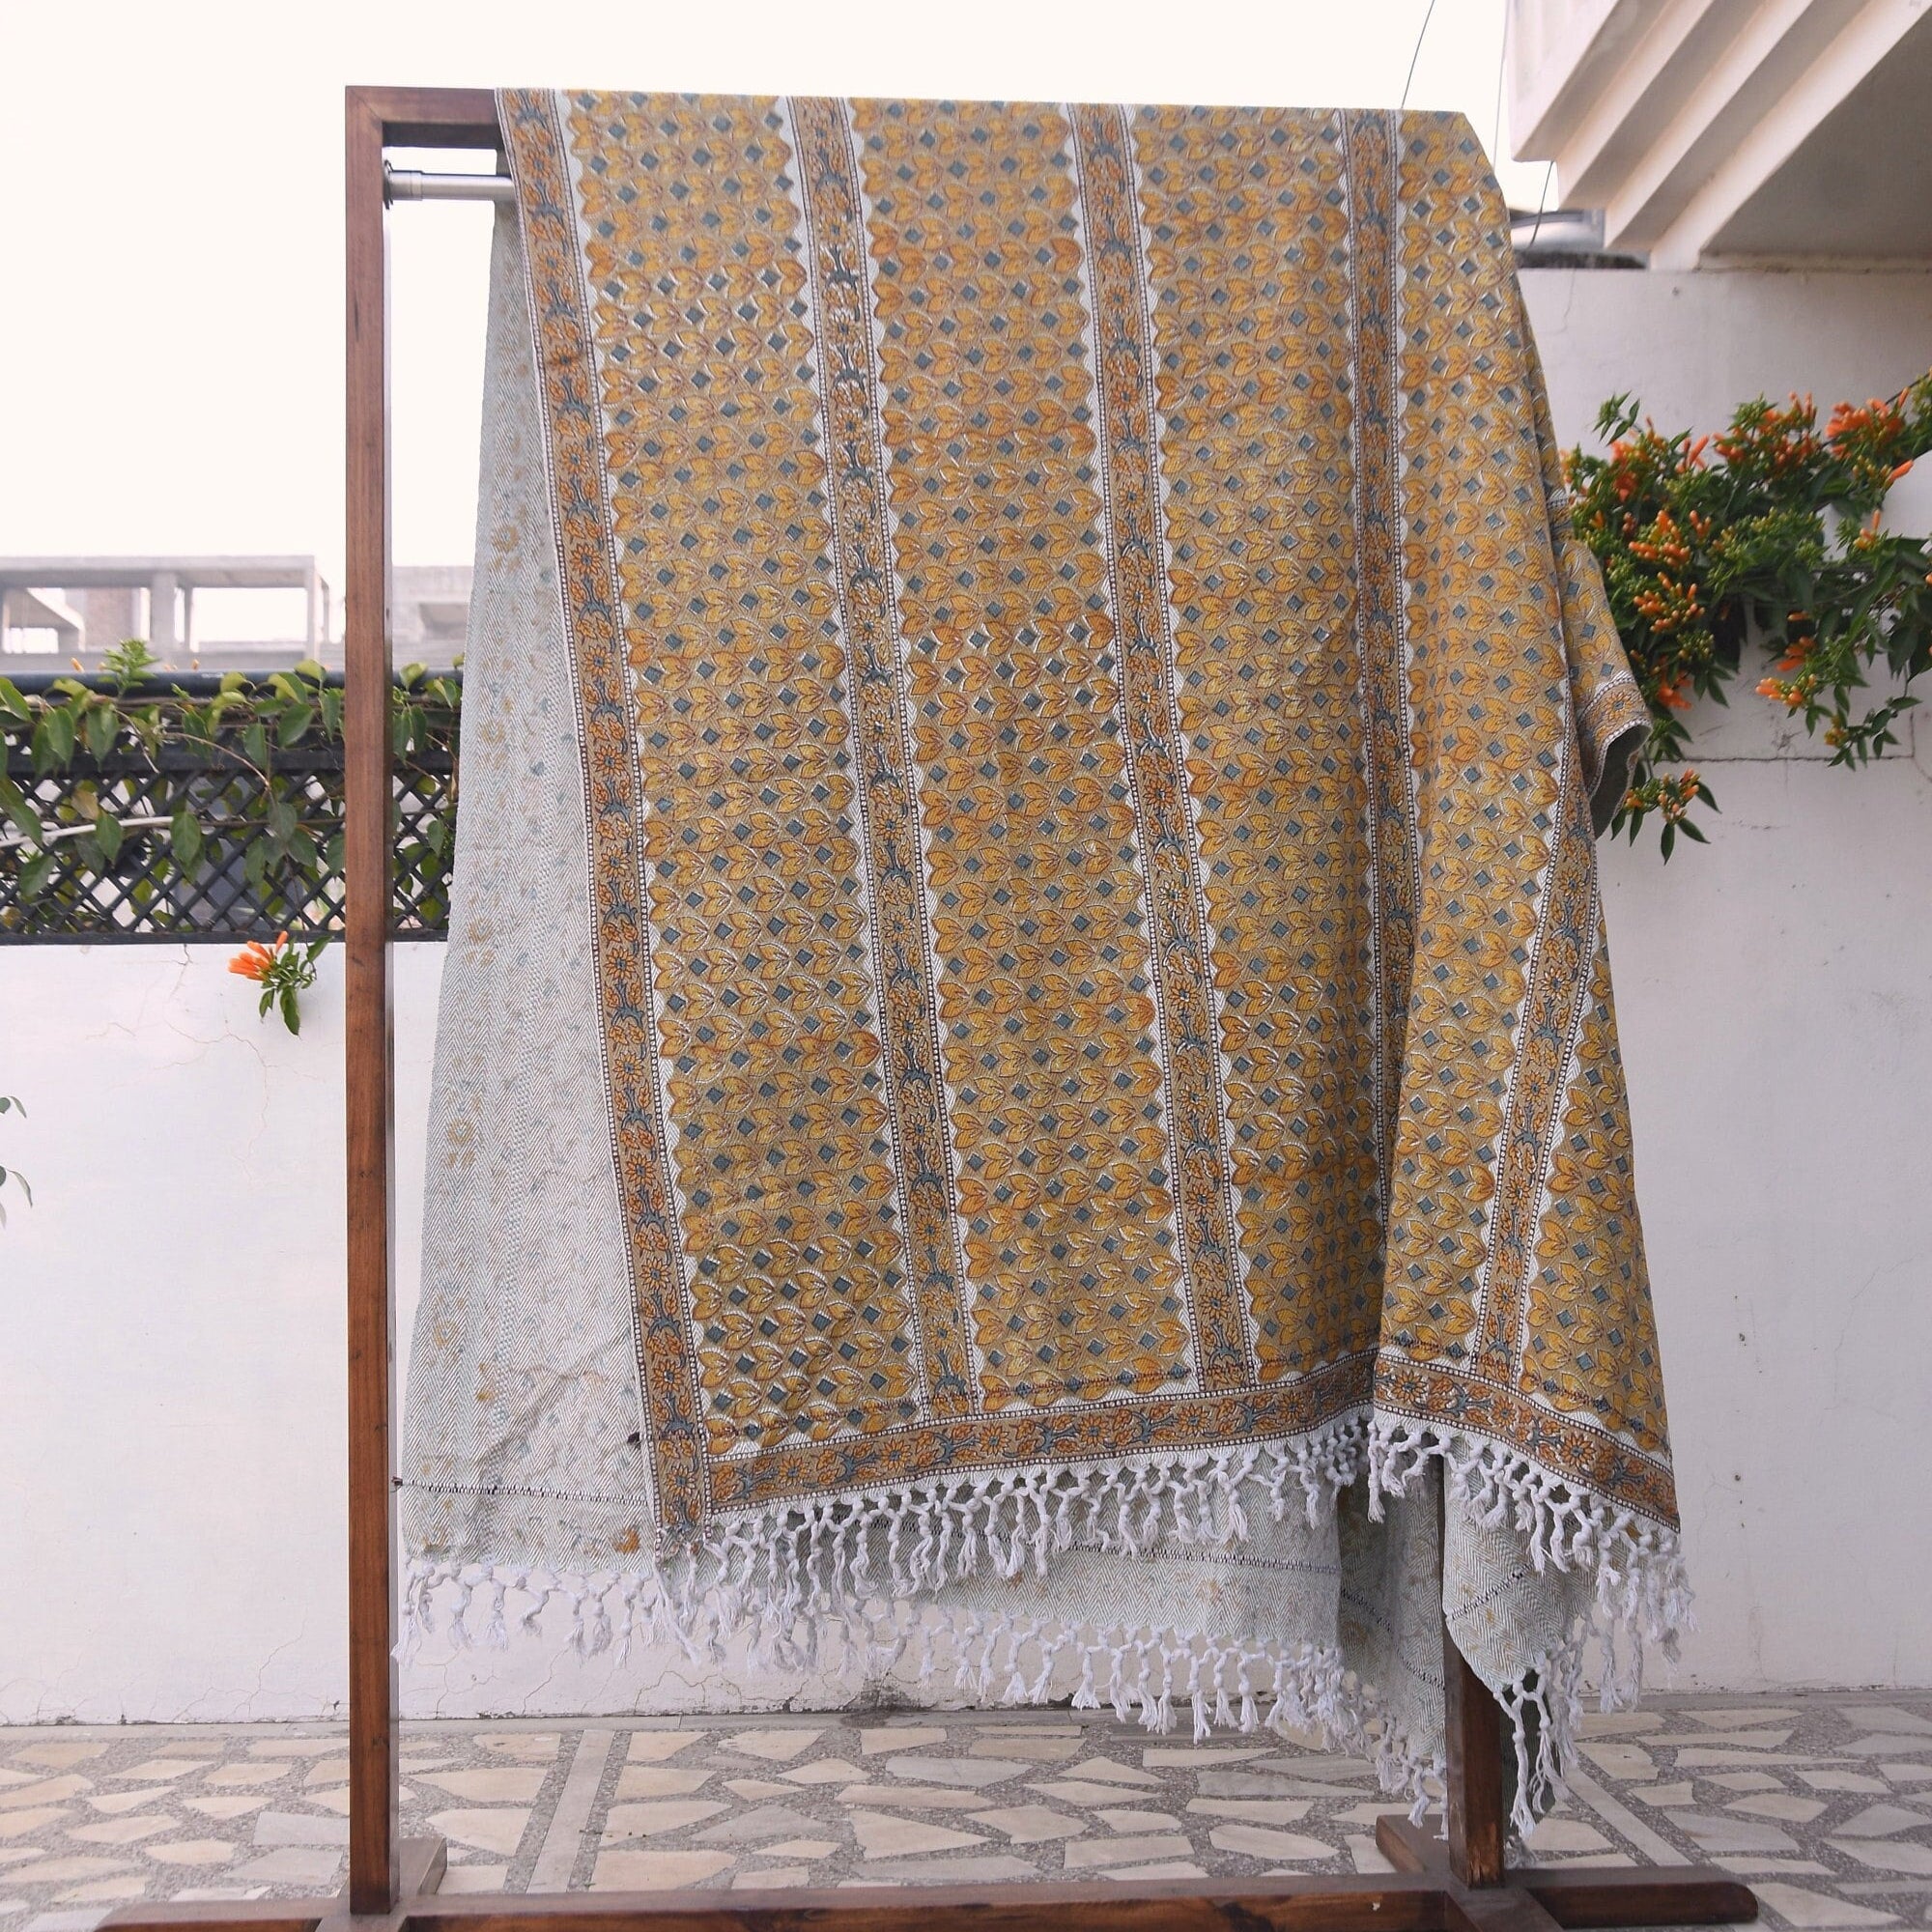 Block print handwoven sofa throws, blankets and throws, handwoven handloom fabric, Woven throw blanket - TITLEE